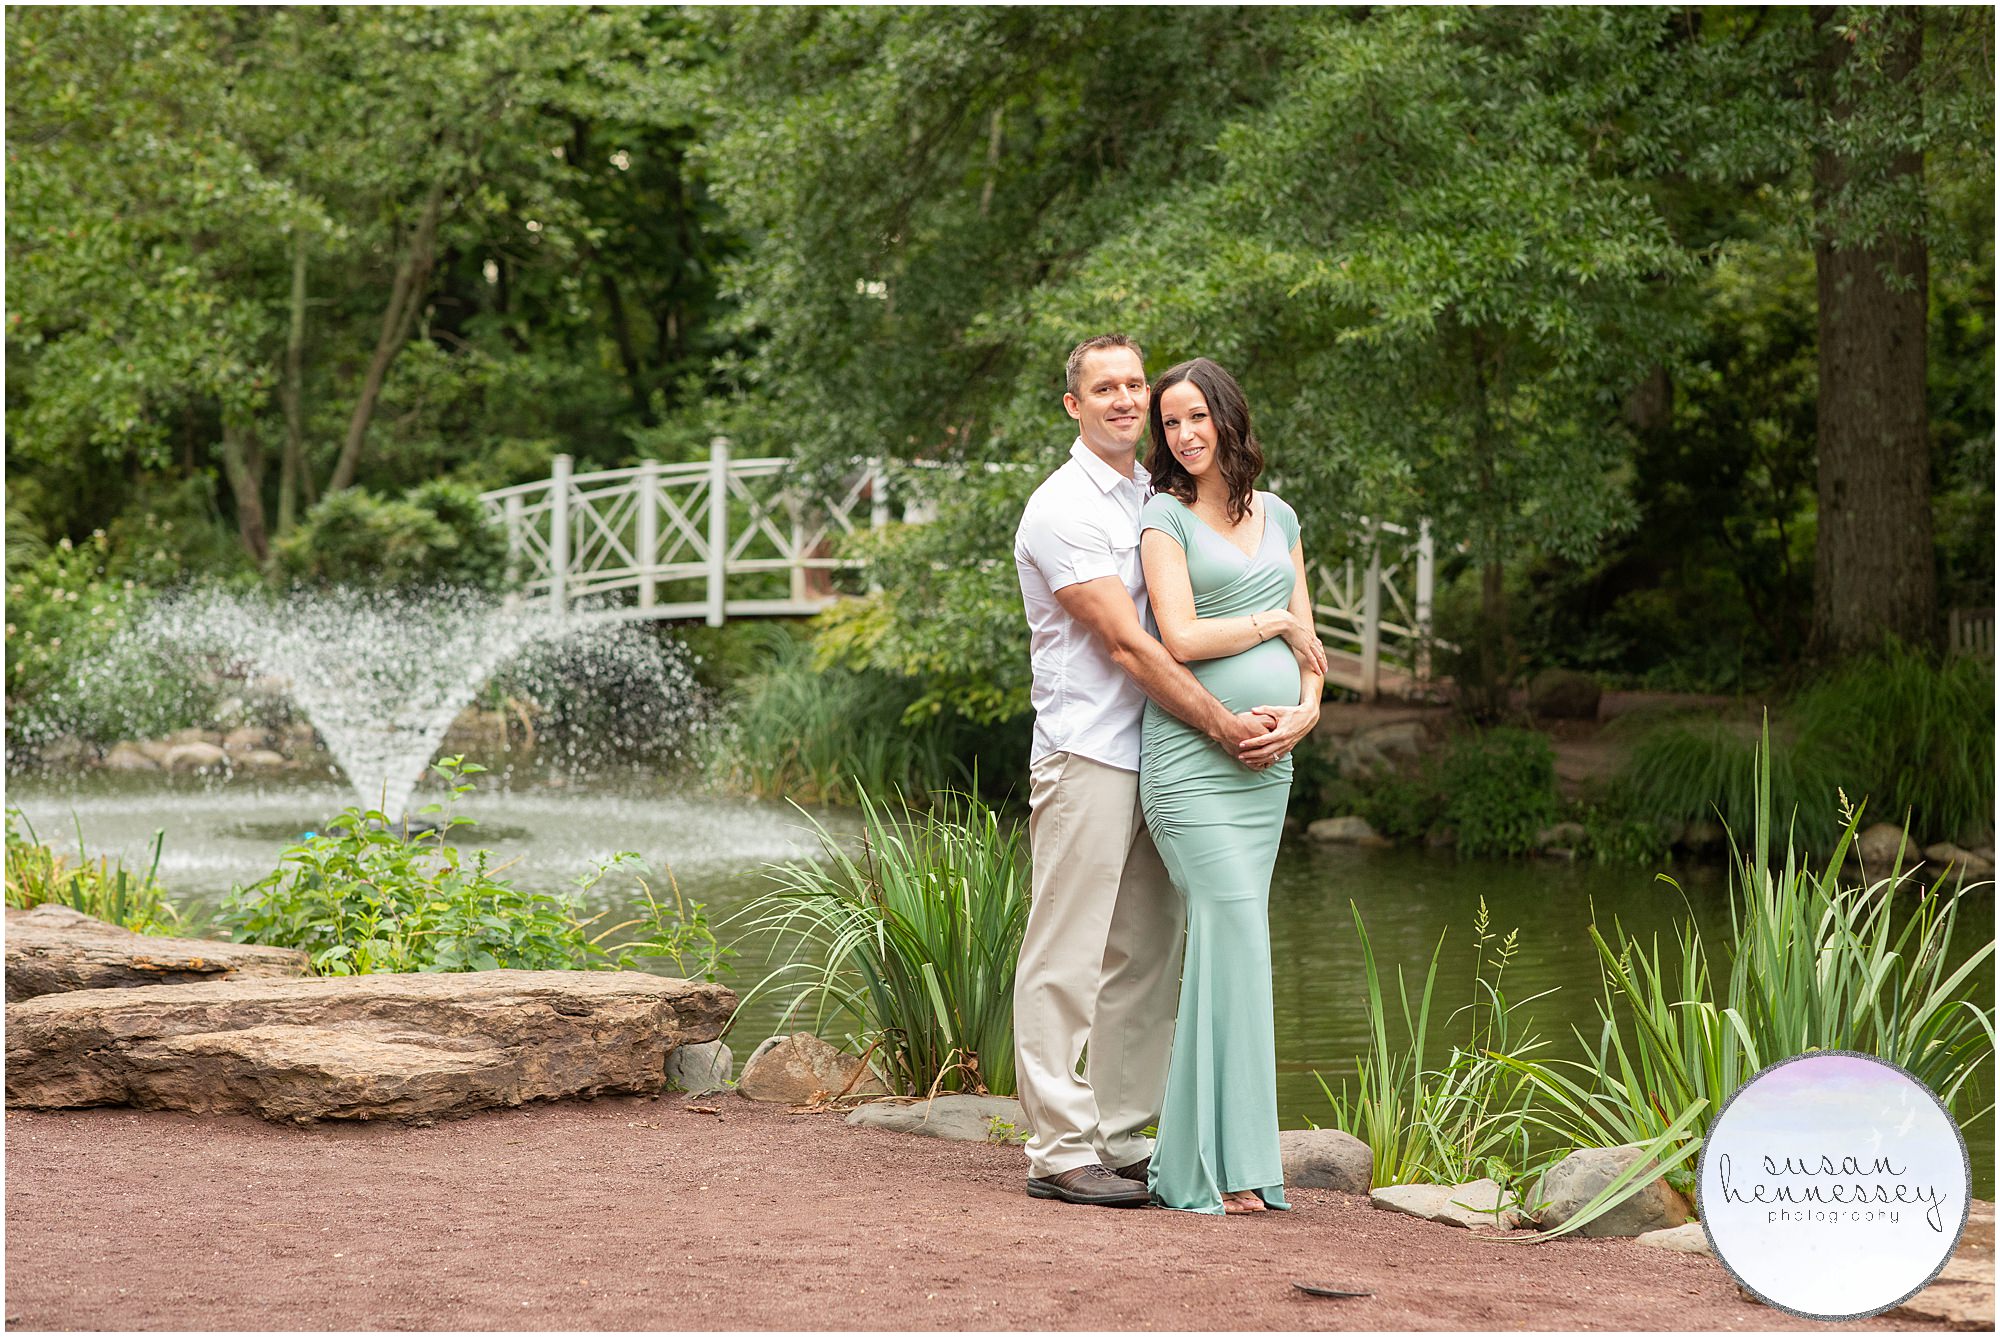 Sayen Gardens is the perfect location for an outdoor maternity session